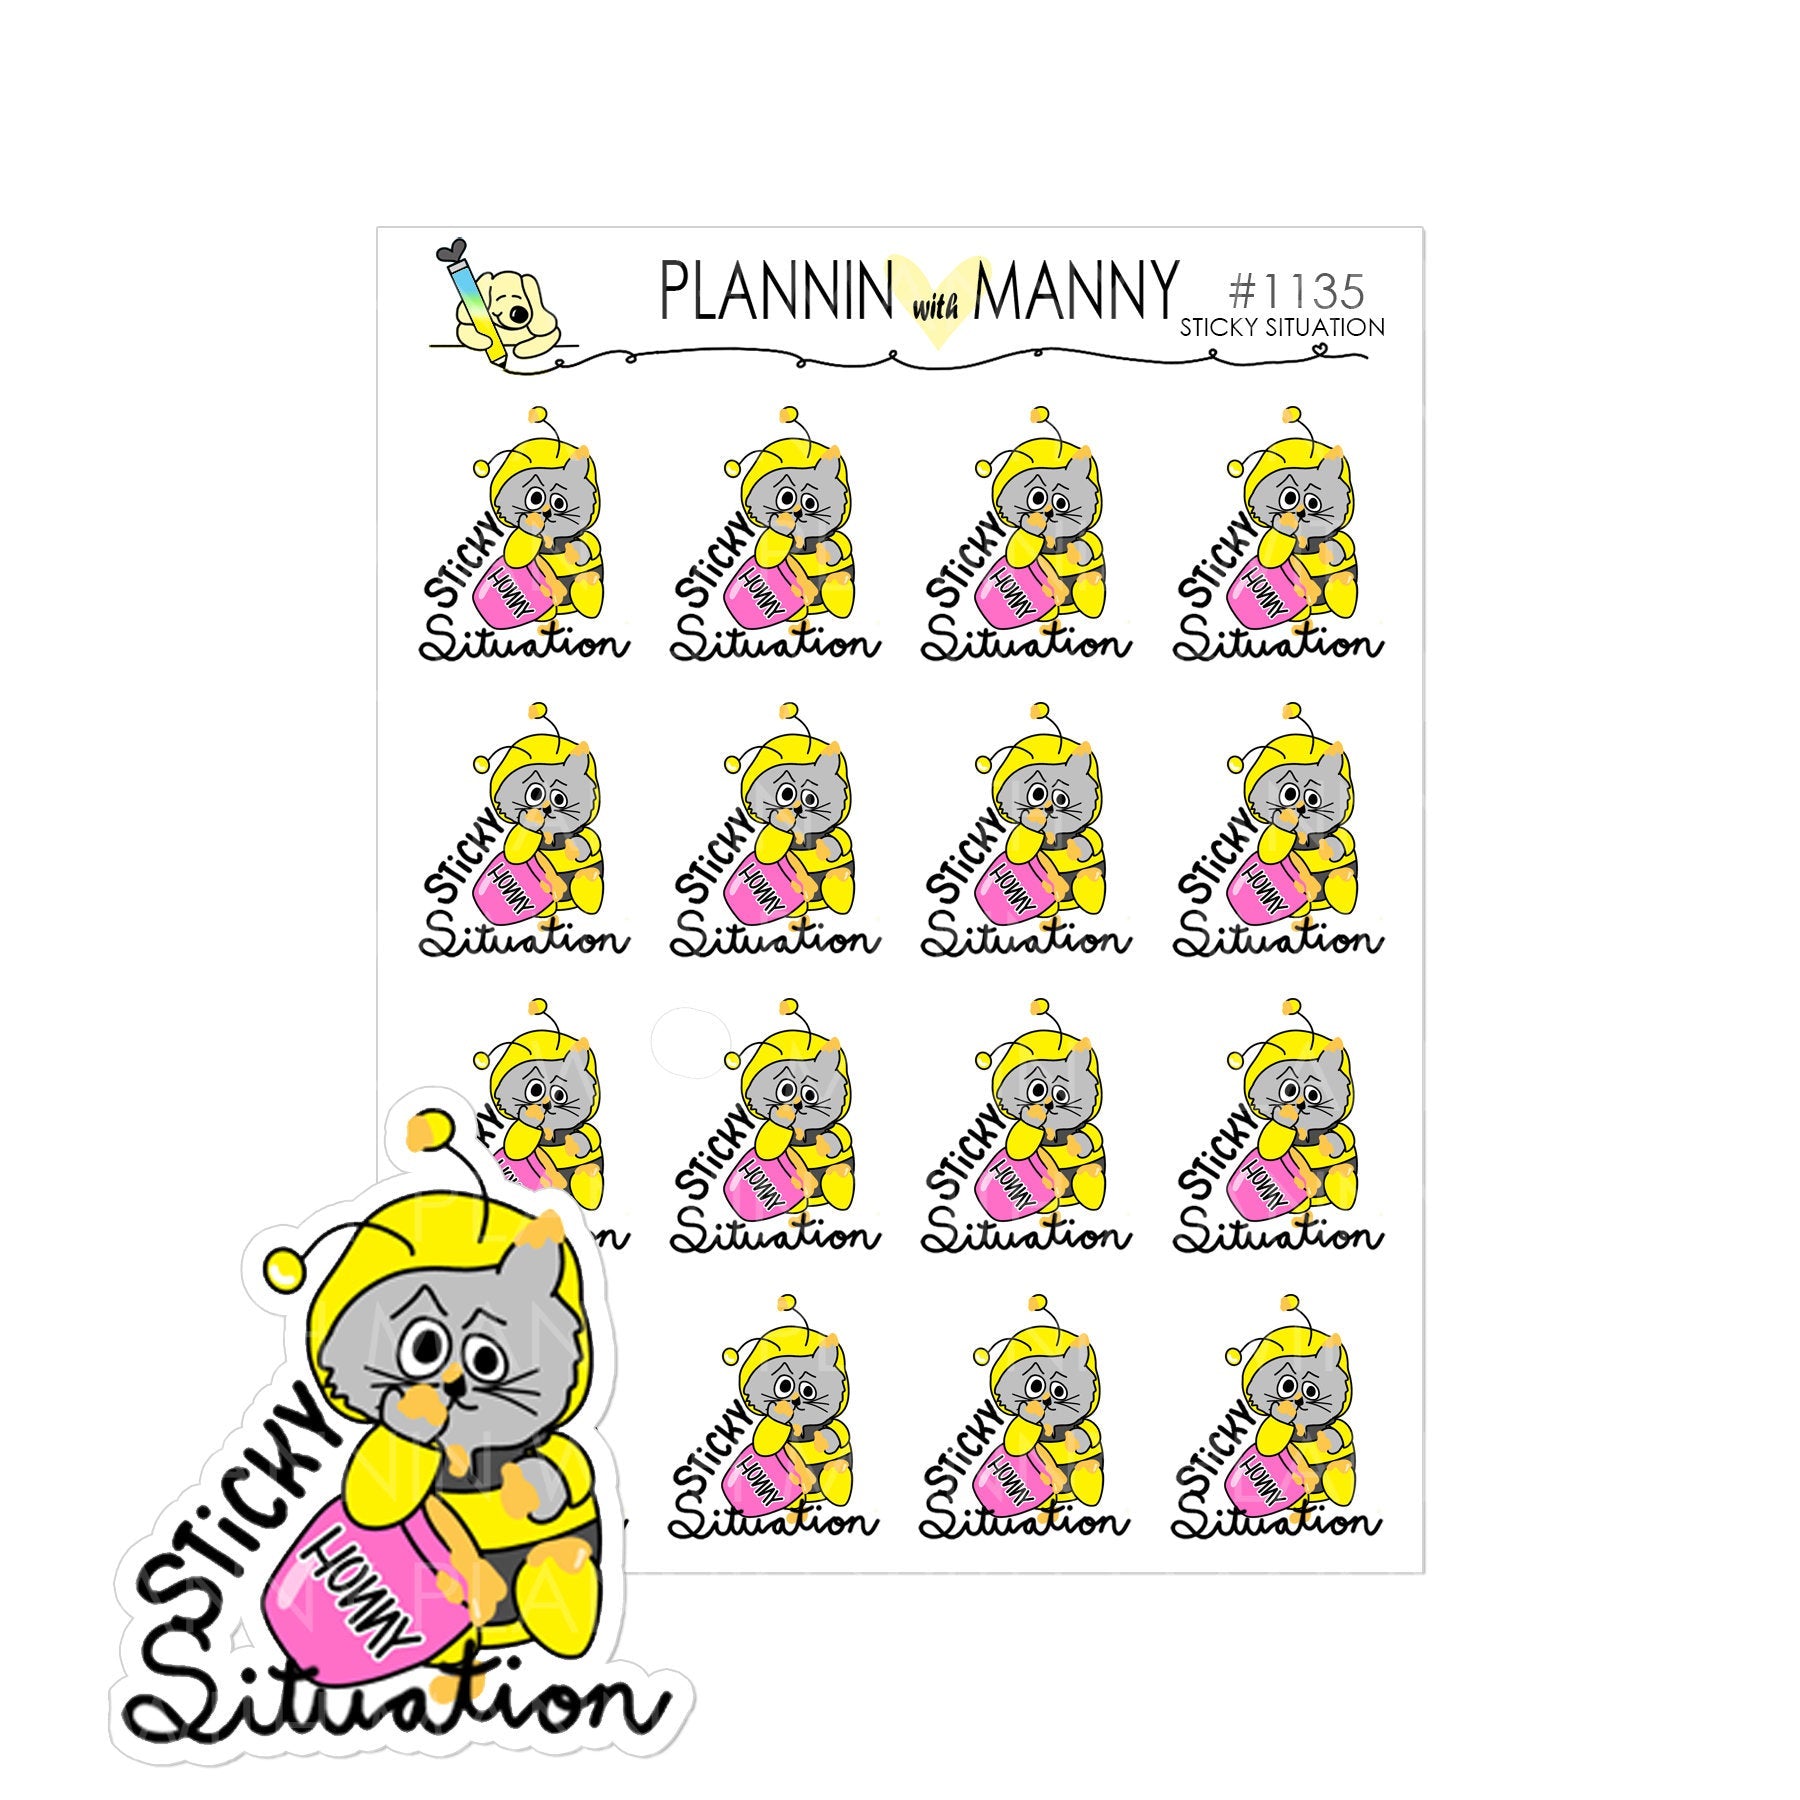 1135 STICKY SITUATION Planner Stickers -  Bee My Hunny Collection